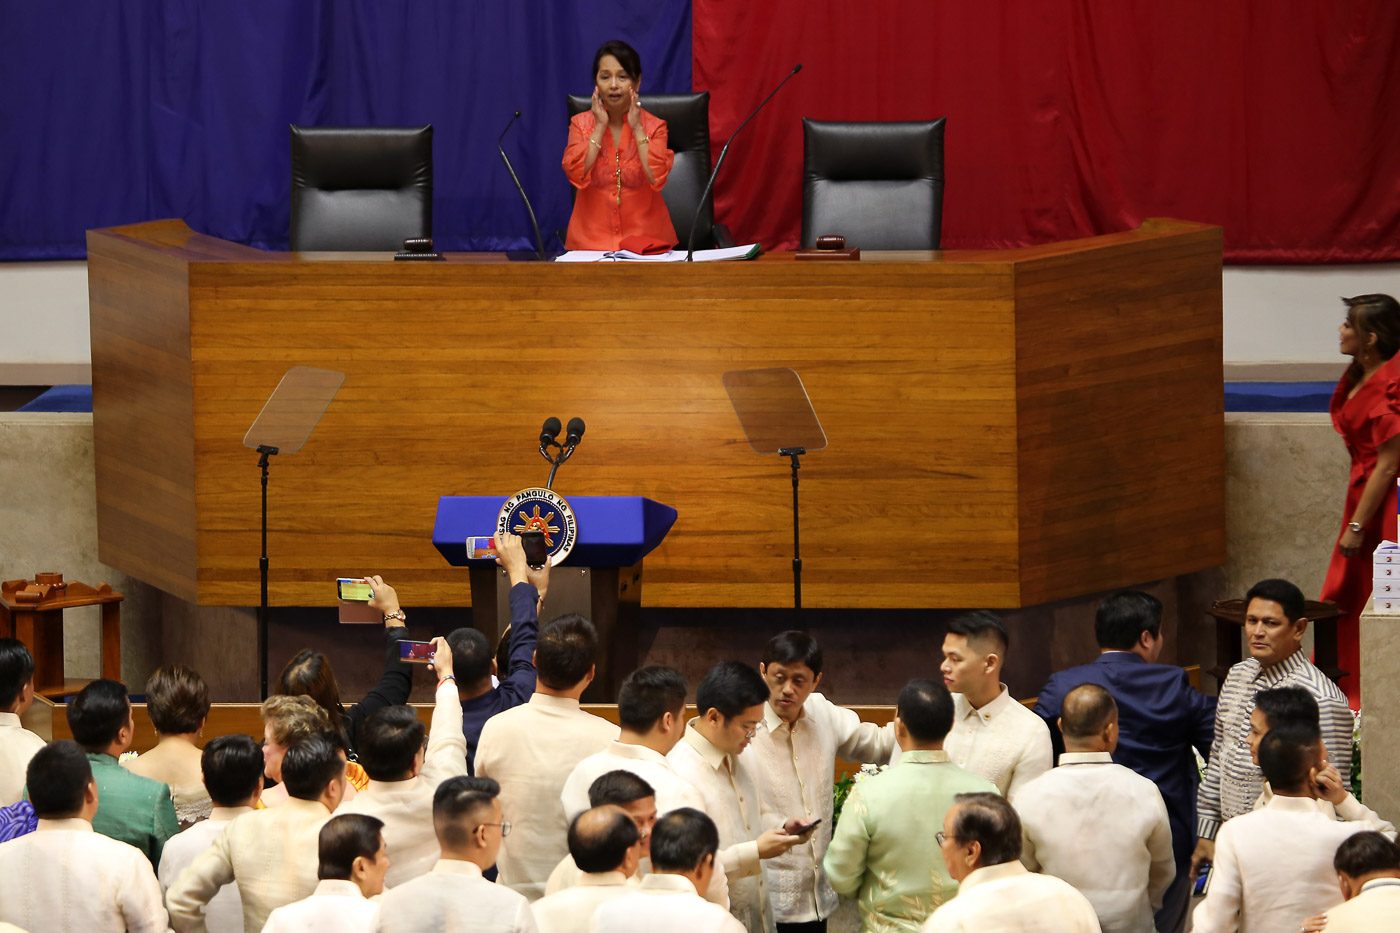 NEW SPEAKER. Former president and now Pampanga 2nd District Representative Gloria Macapagal Arroyo stands at the rostrum after taking her oath as House Speaker on July 23, 2018. Photo by Ben Nabong/Rappler  